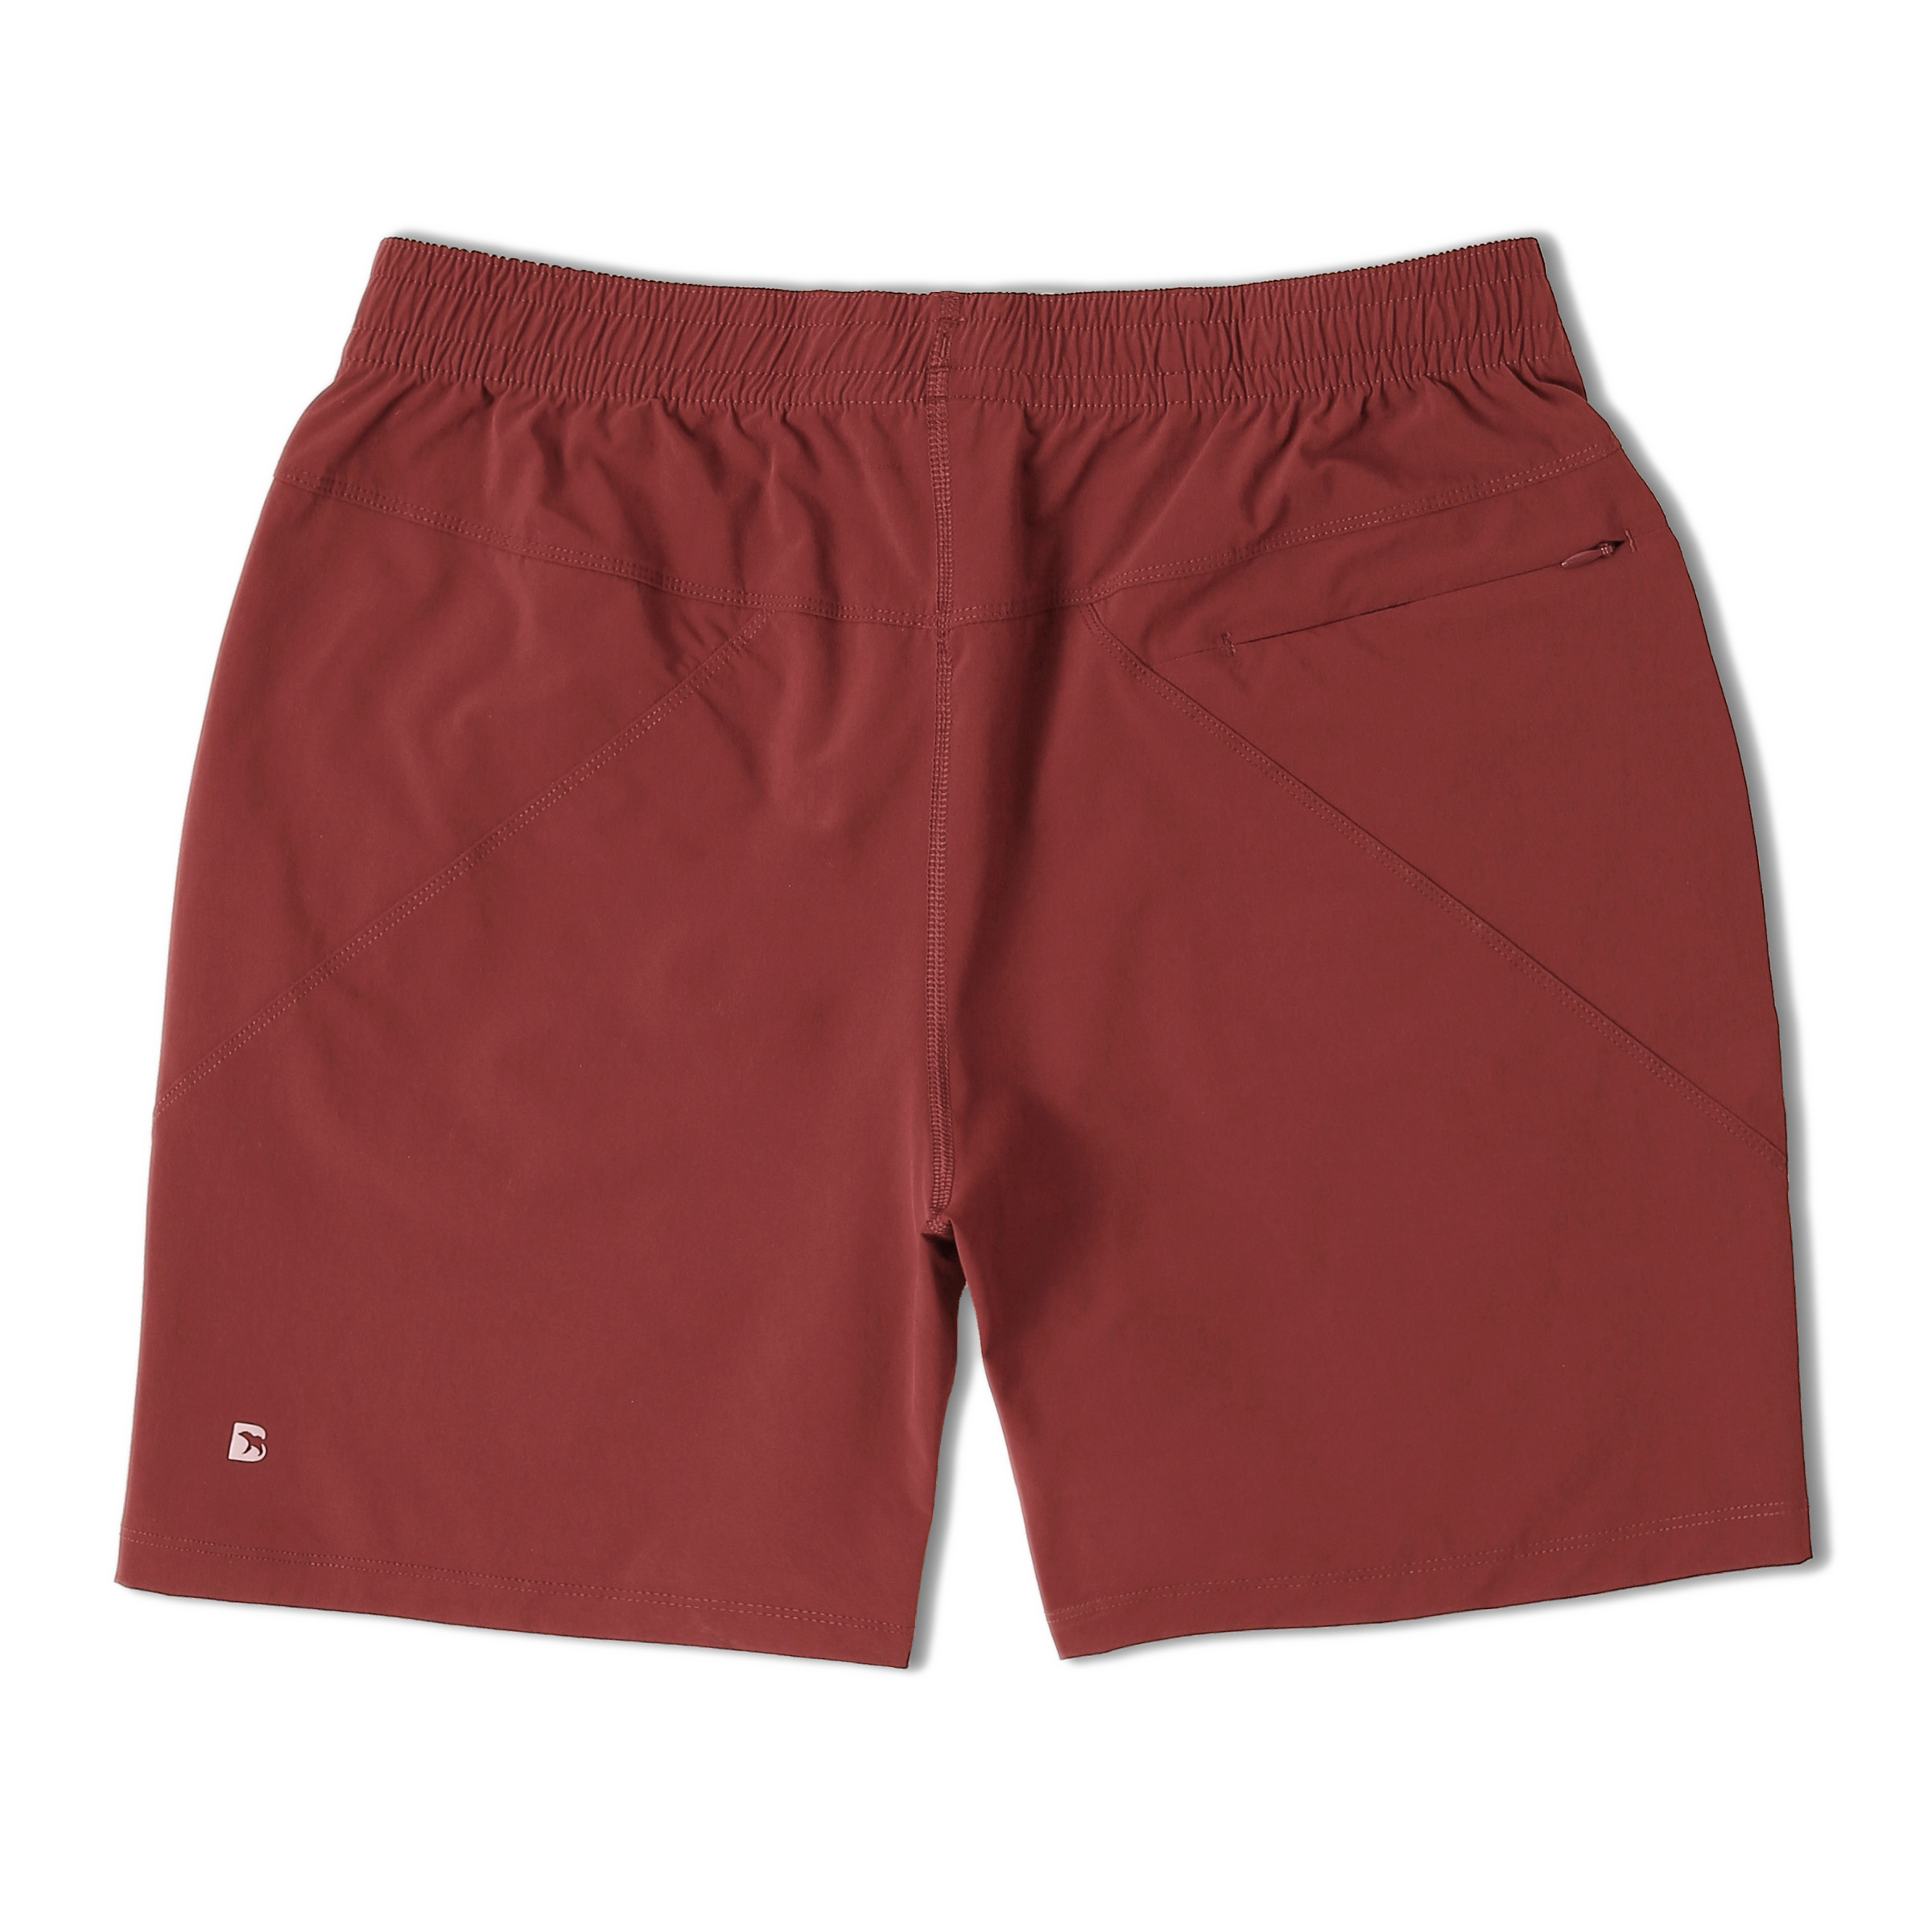 Atlas Short 7" Maroon Back with elastic waistband, back right zippered pocket, and small reflective logo of Bear drawn inside the letter B in bottom left corner